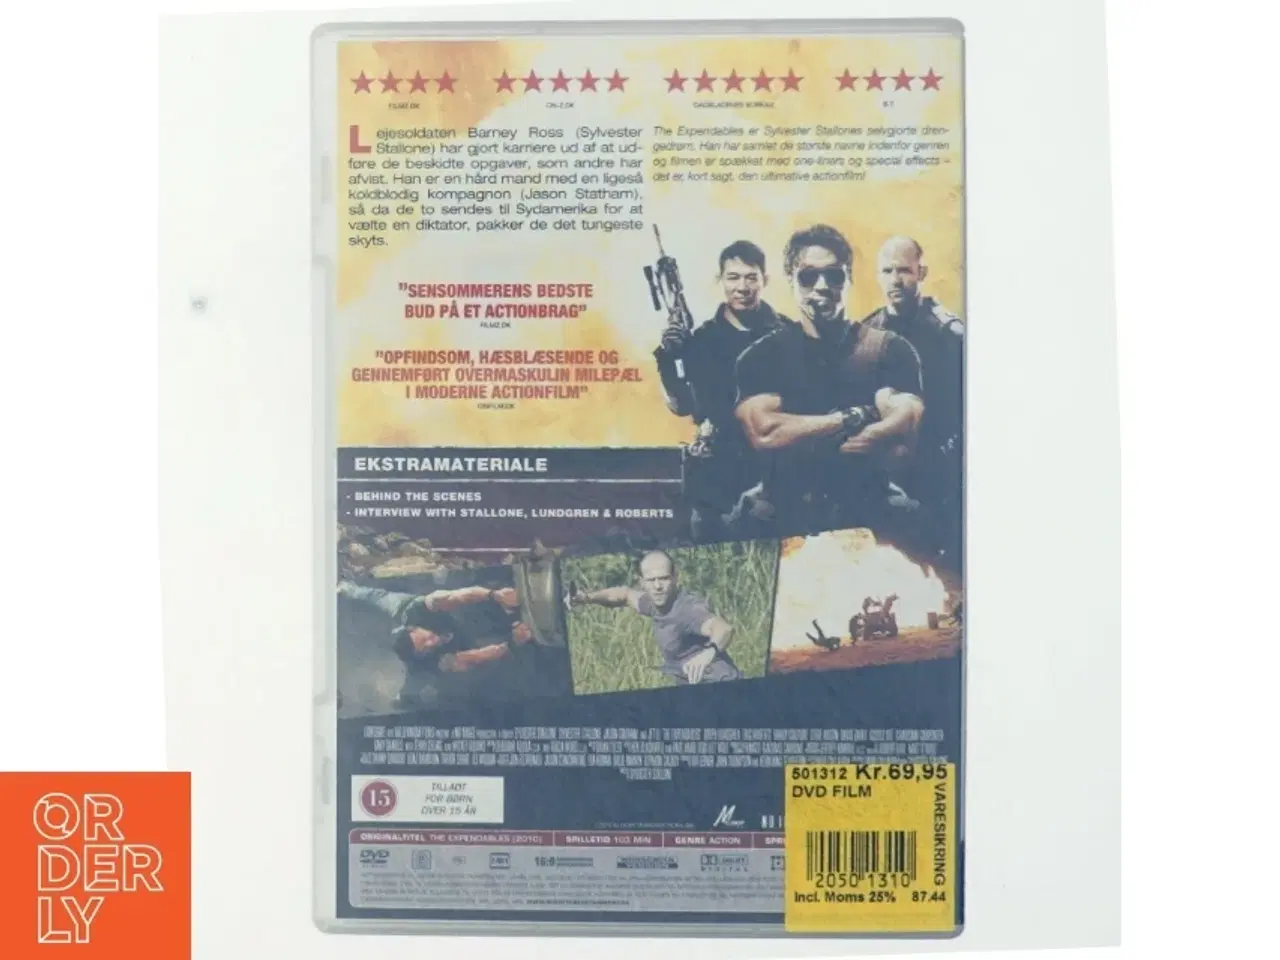 Billede 3 - The Expendables (DVD)